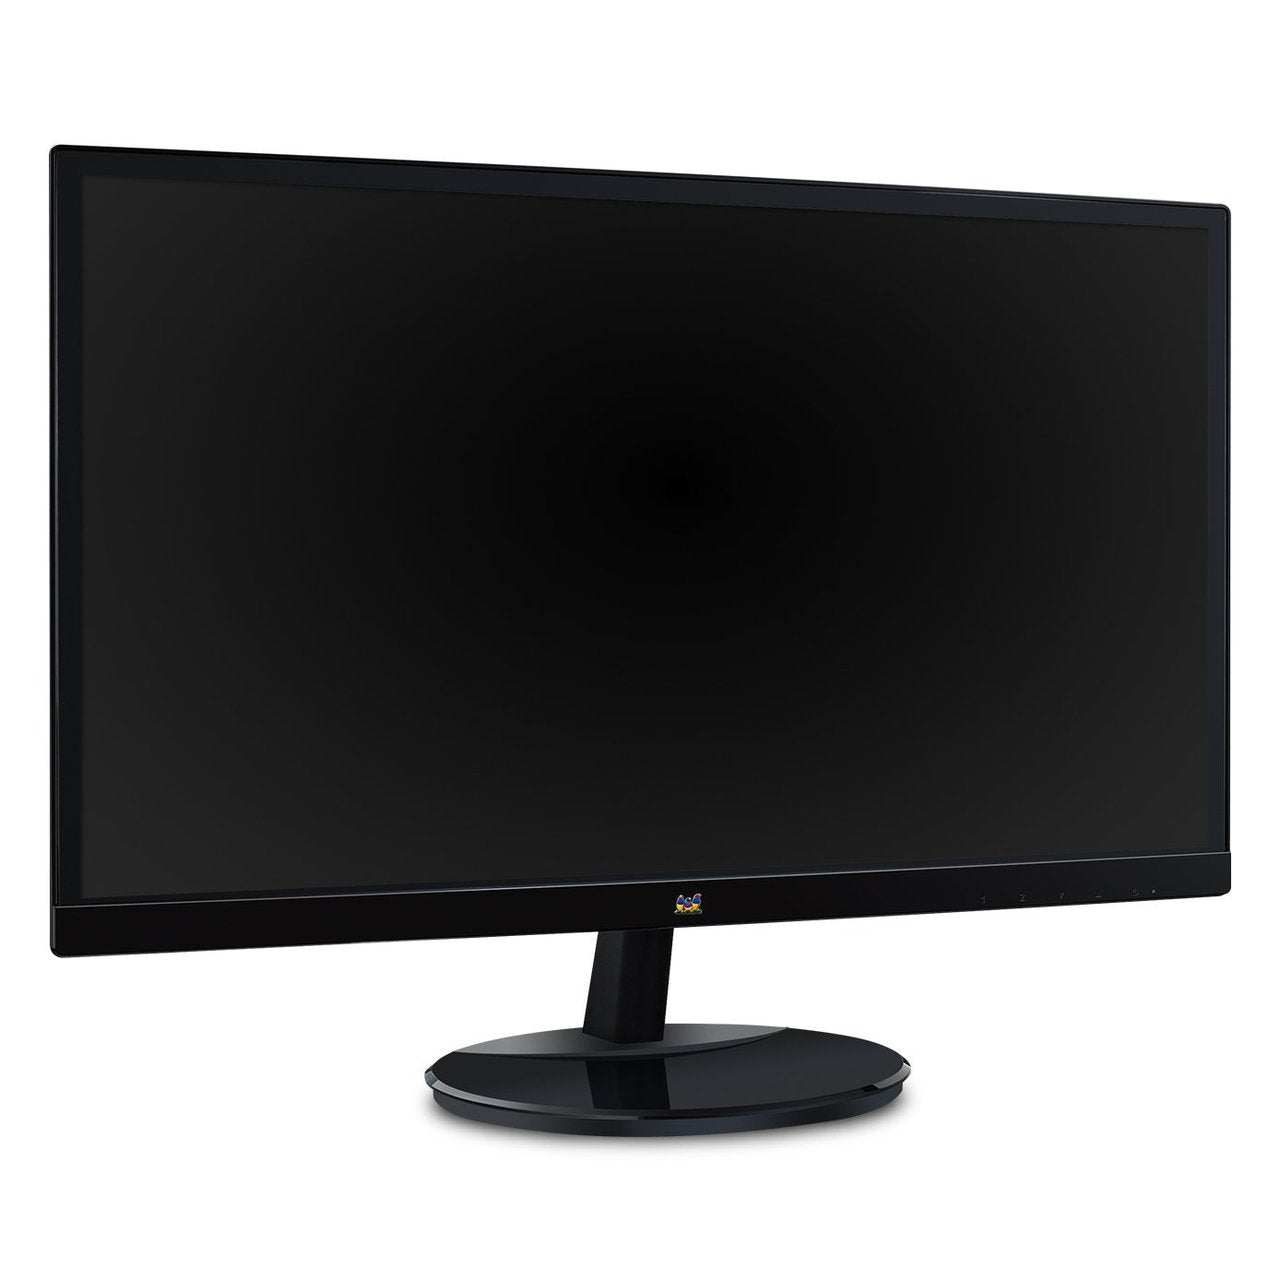 ViewSonic VA2459-SMH-R 24" IPS 1080p Frameless LED Monitor with HDMI and VGA Inputs - Certified Refurbished